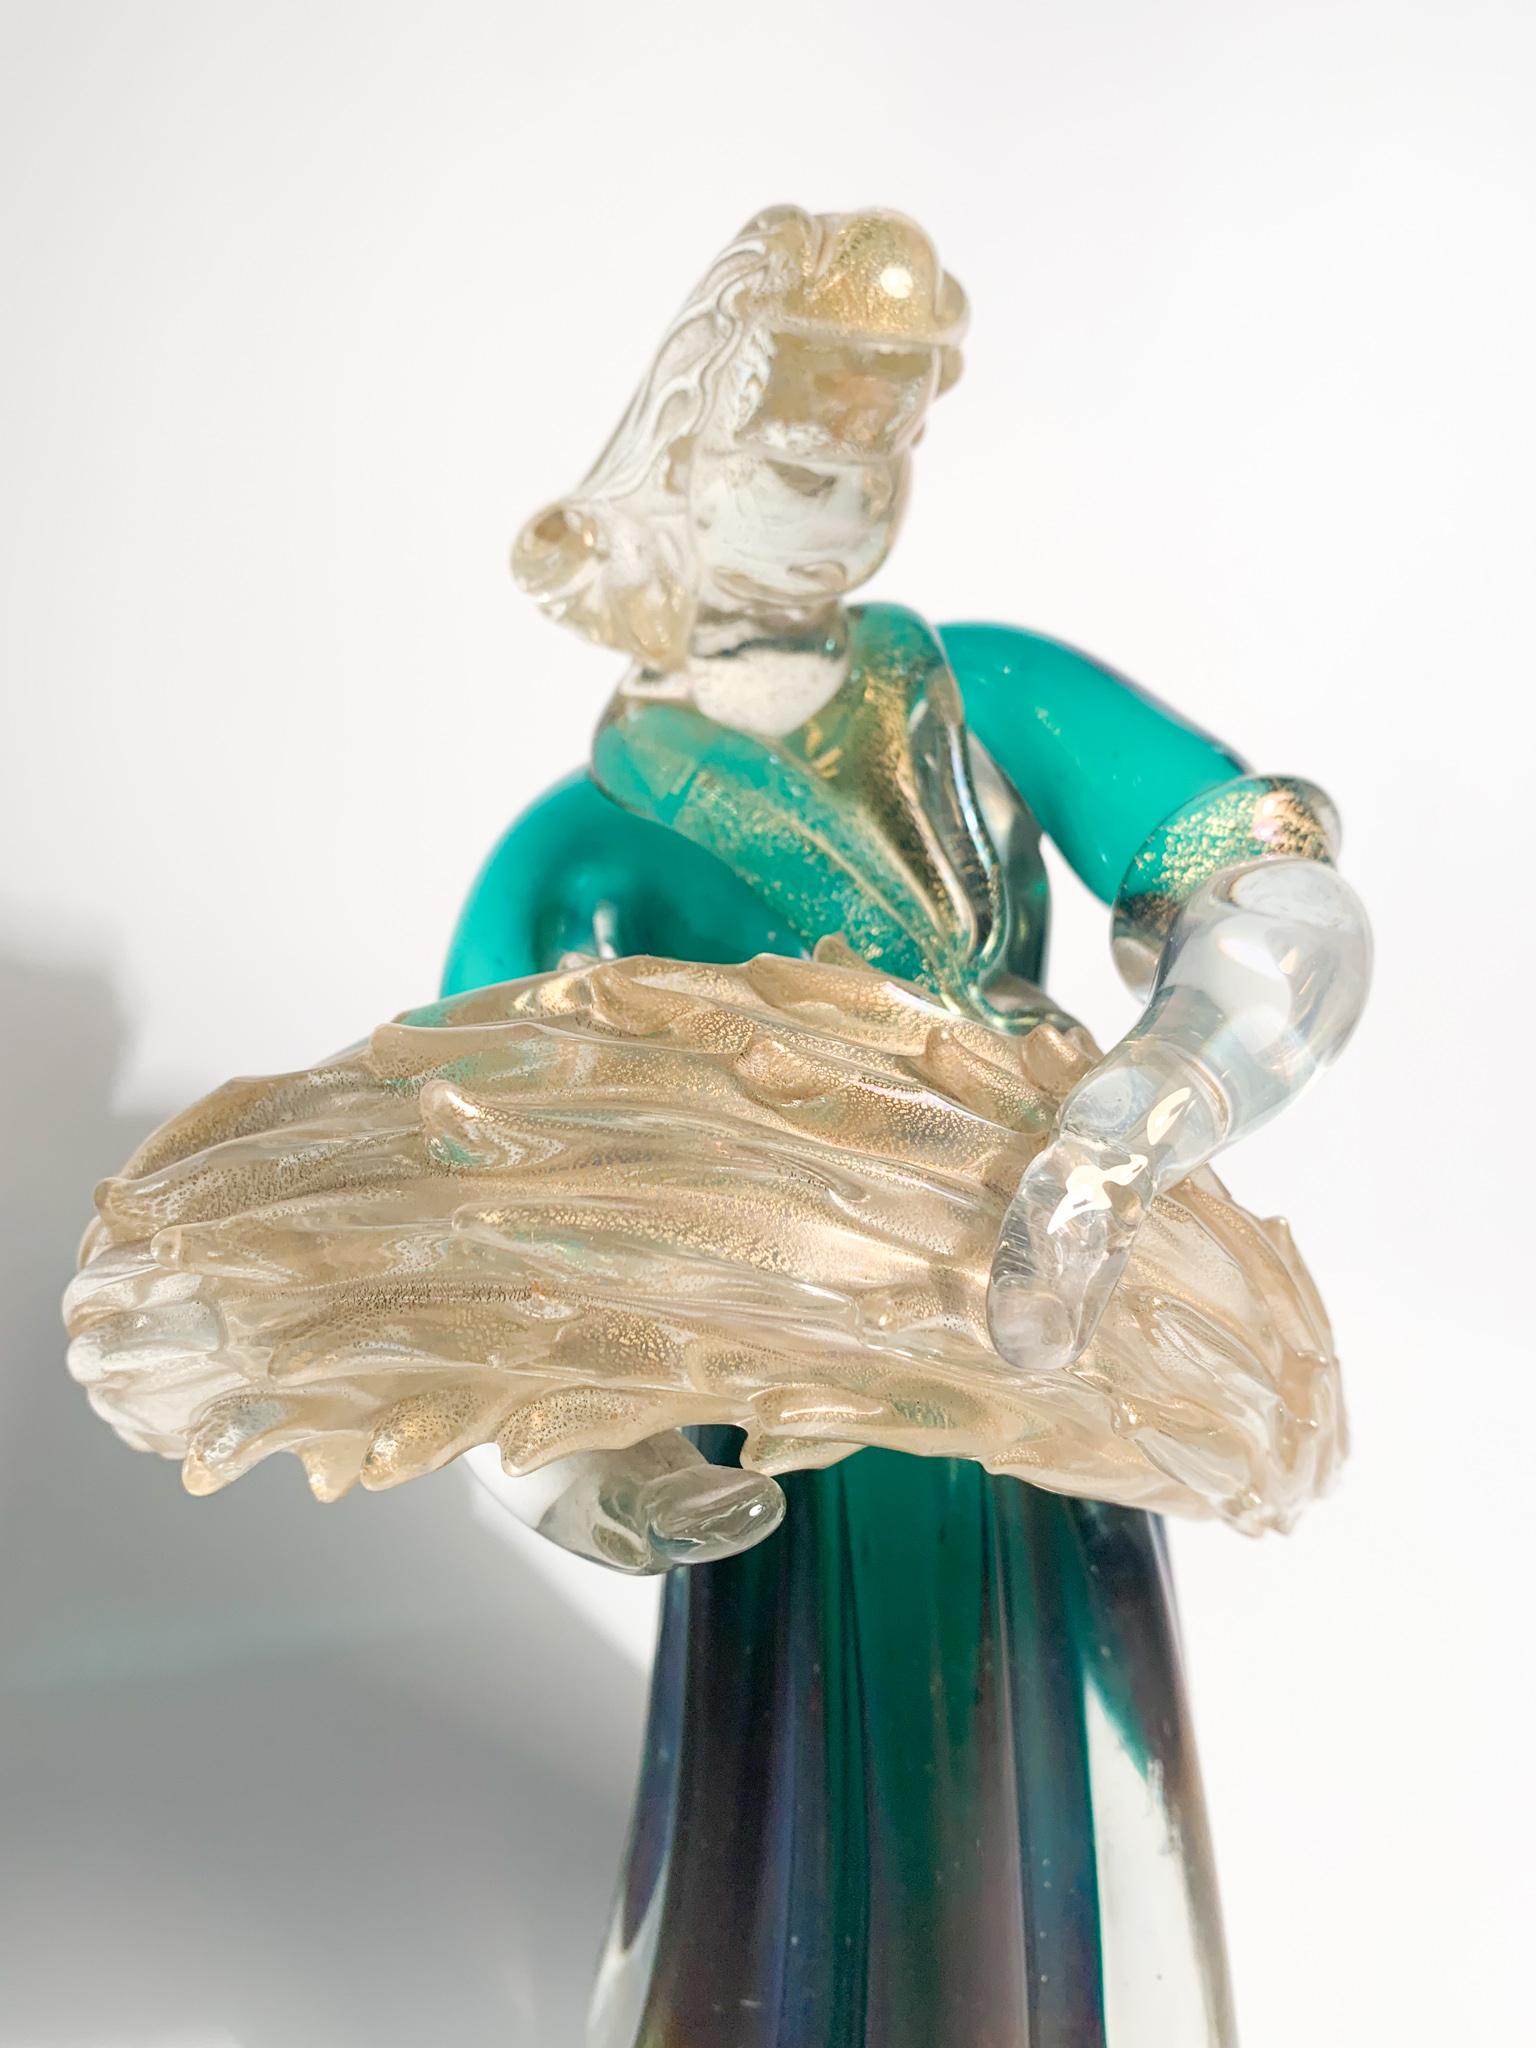 Sculpture in iridescent green Murano glass and gold leaves, depicting a lady with ears of wheat, made by Archimede Seguo in the 1940s

Ø cm 12 h cm 23.